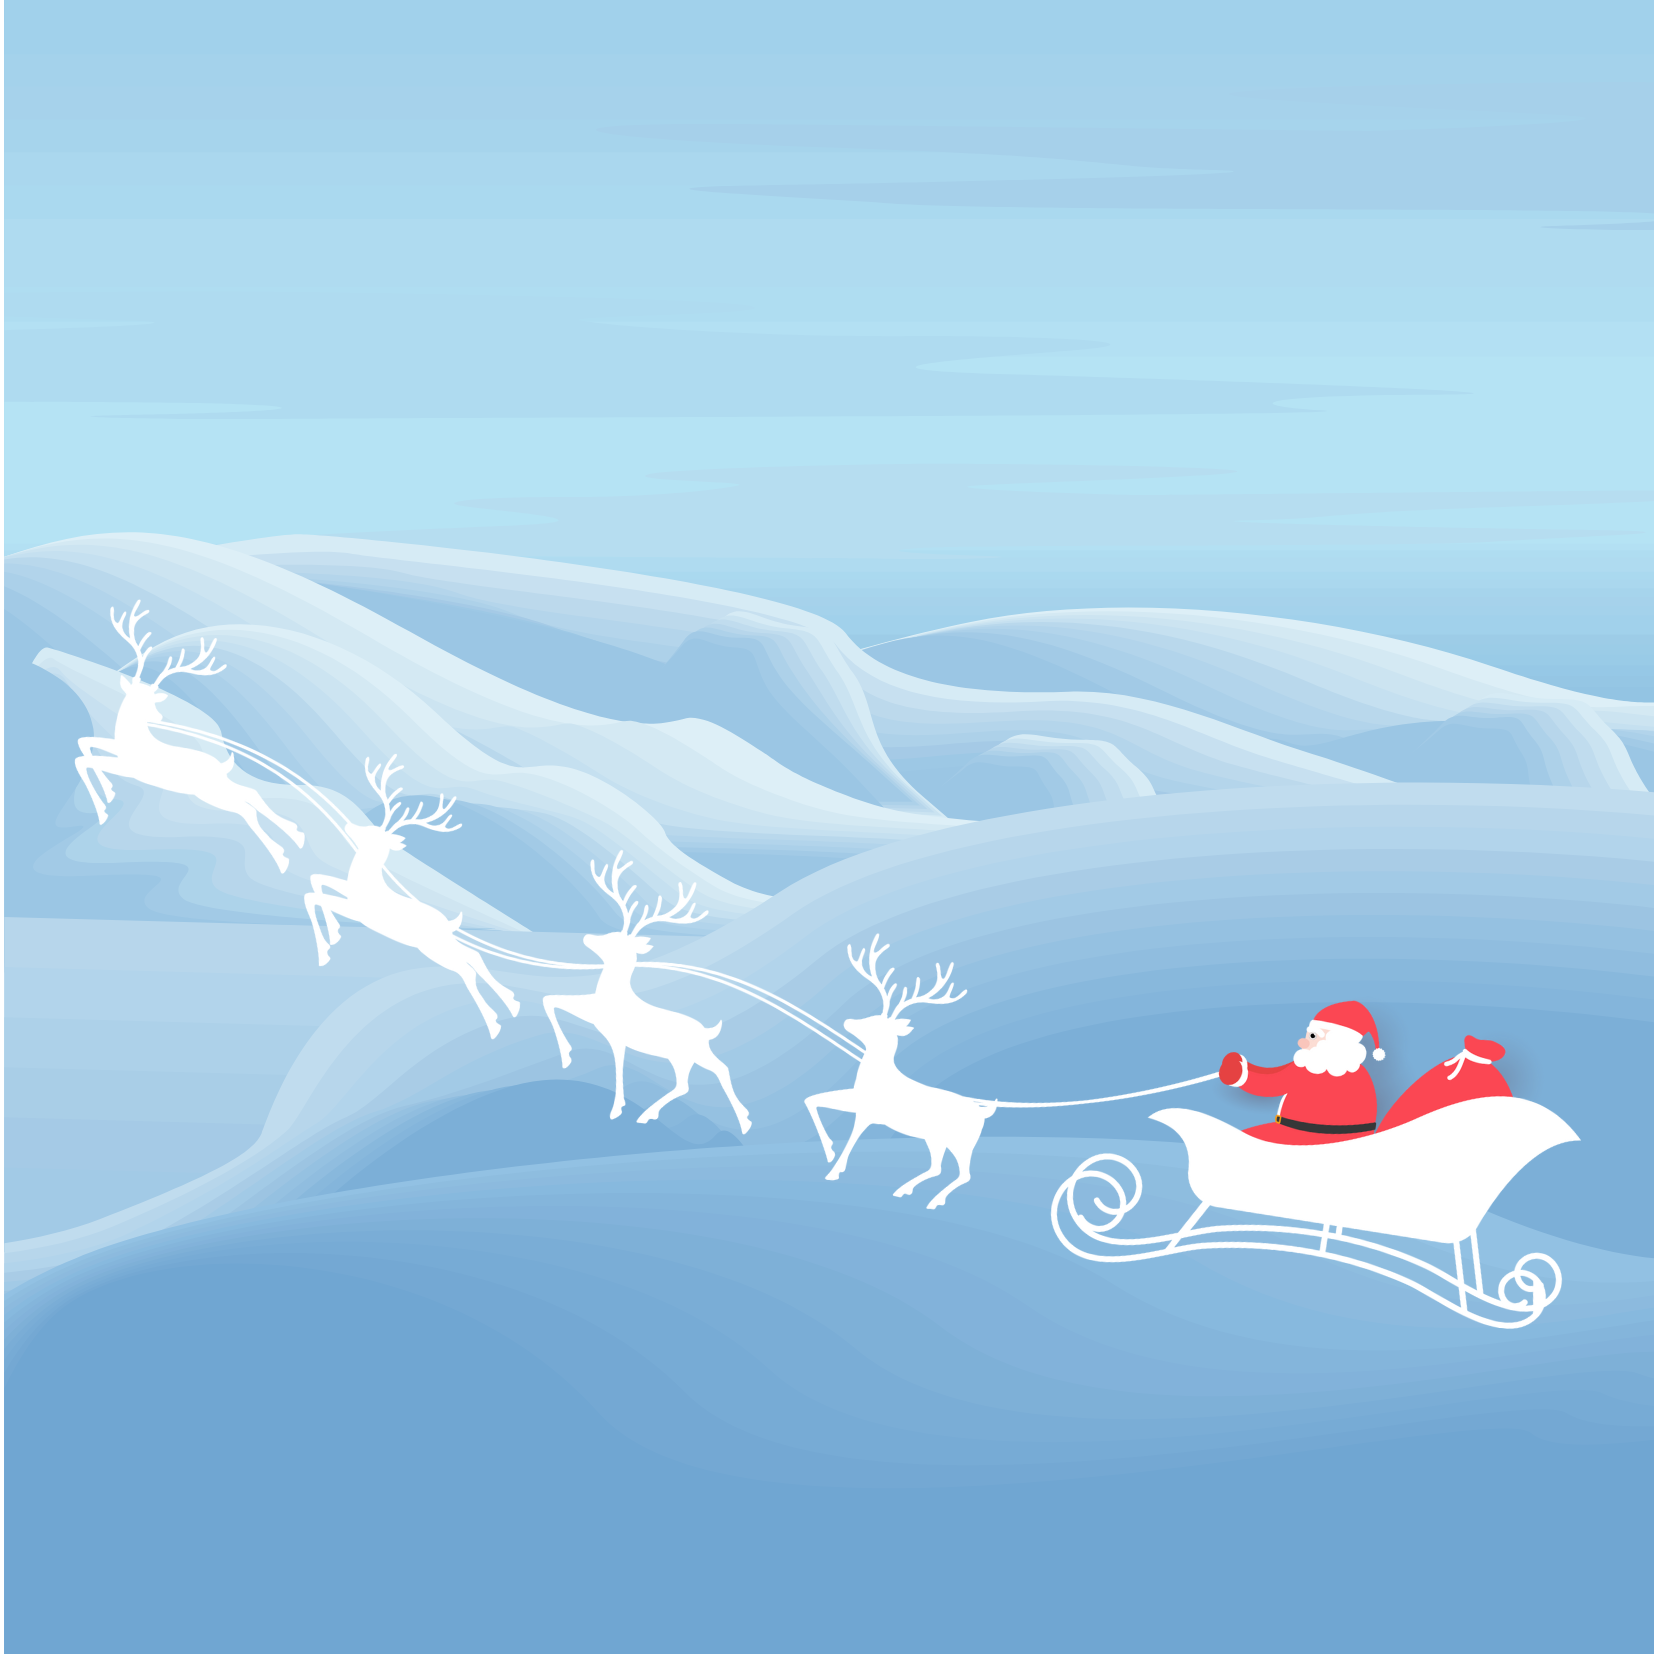 Illustration of Santa and his reindeer flying over snowing mountains.